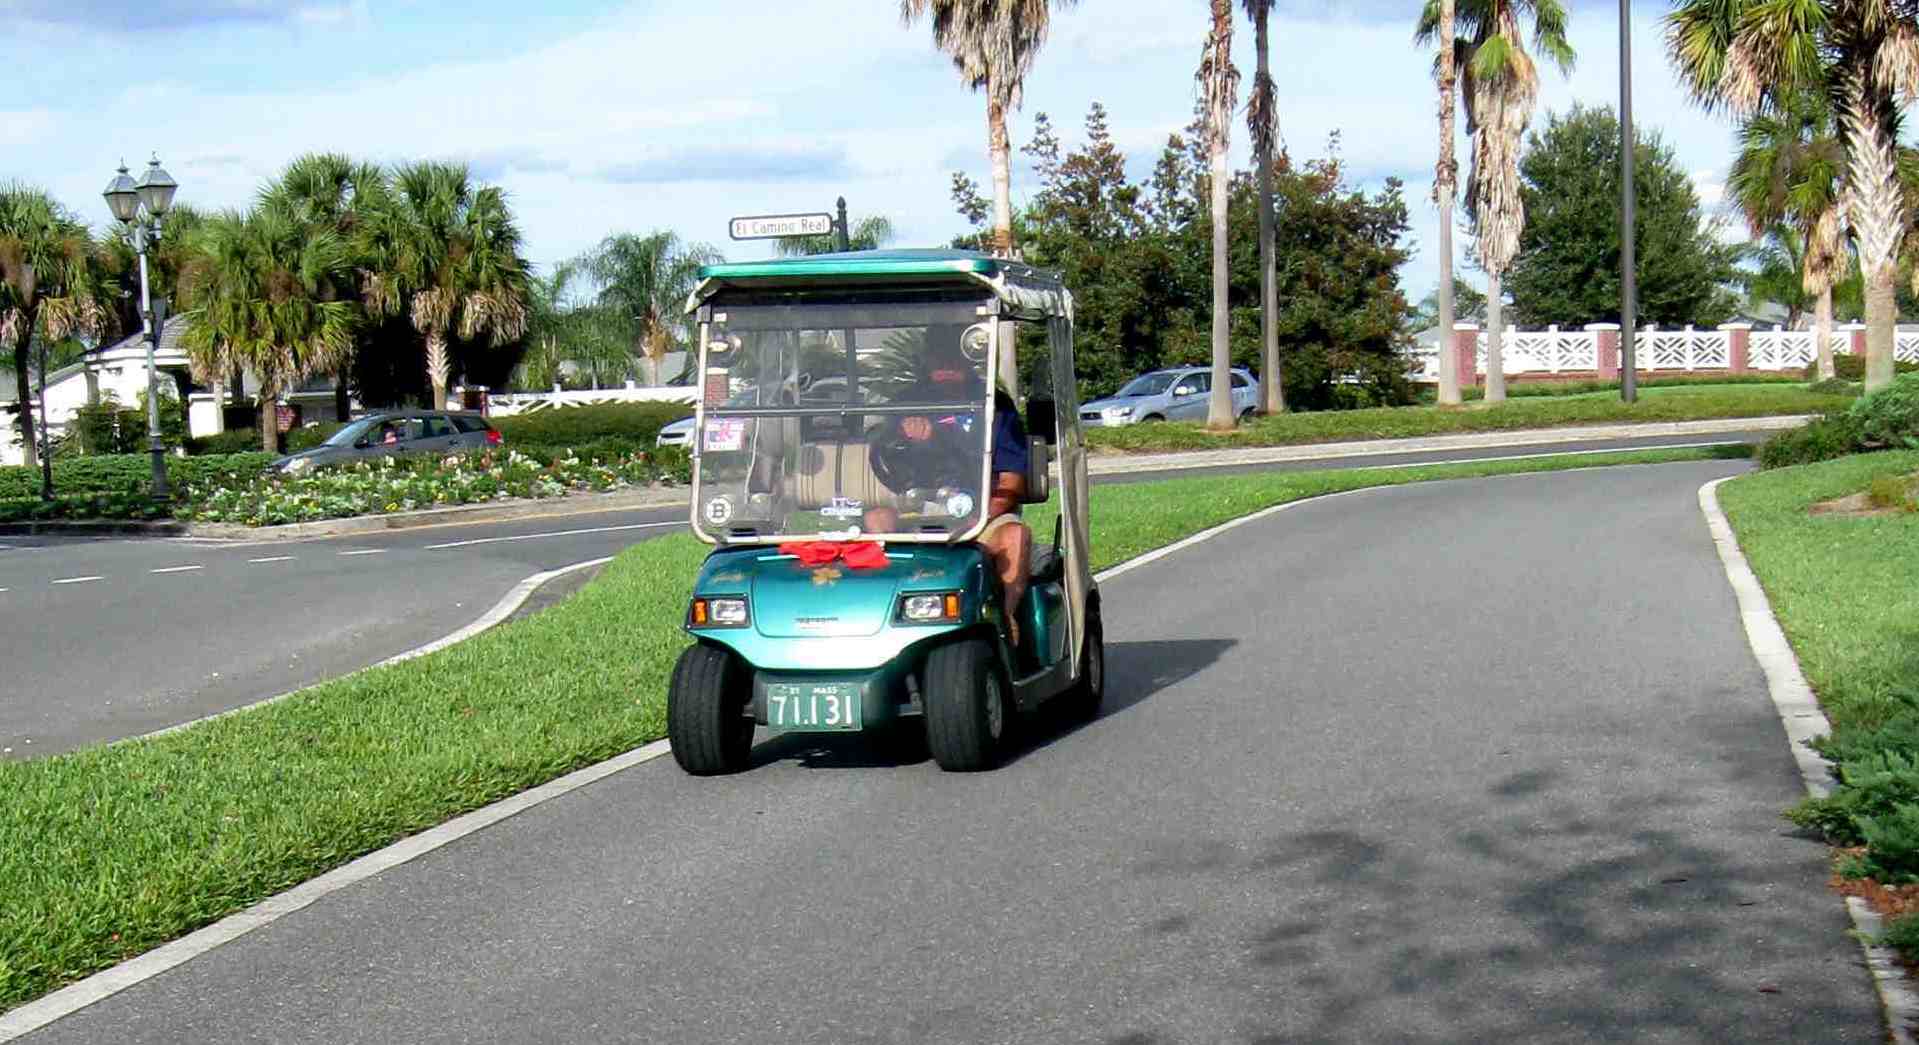 AAC remains deadlocked on golf cart path striping with Lambrecht out